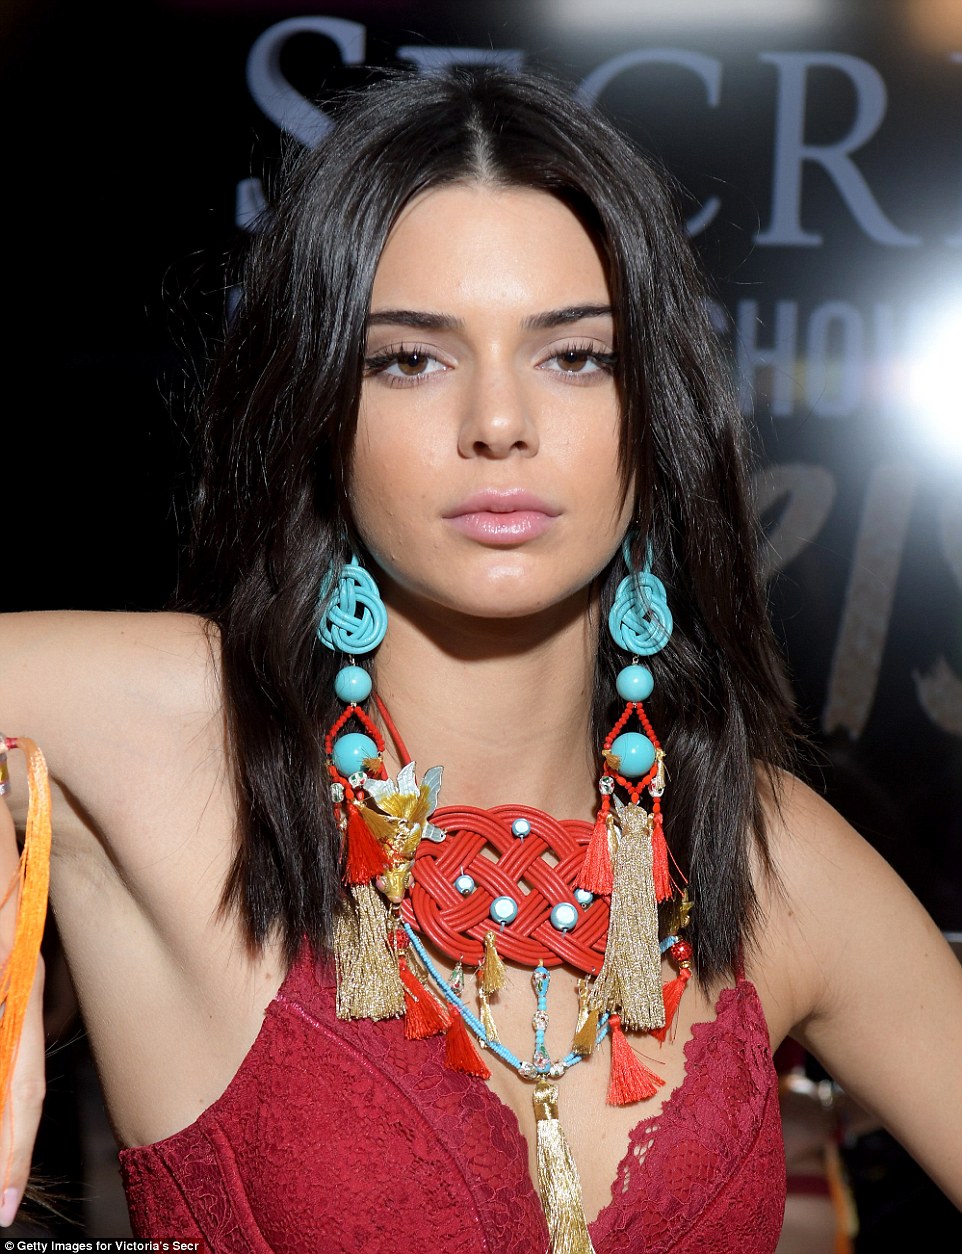 What a jewel! She gave backstage photographers a closer look at her elaborate chandelier earrings and statement necklace